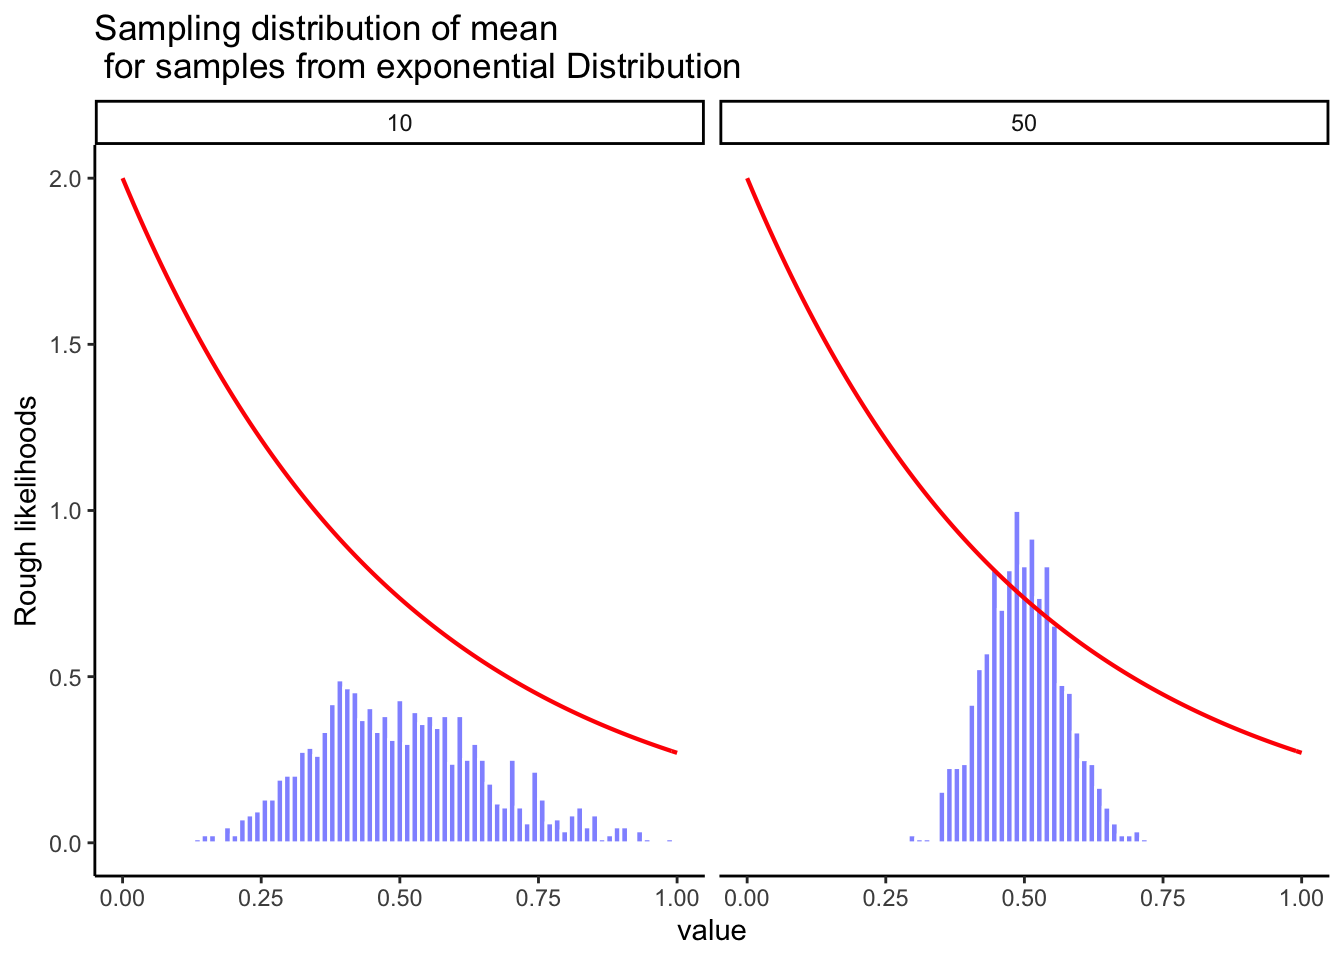 Illustration that the shape of the sampling distribution of the mean is normal, even when the samples come from a non-normal (exponential in this case) distribution